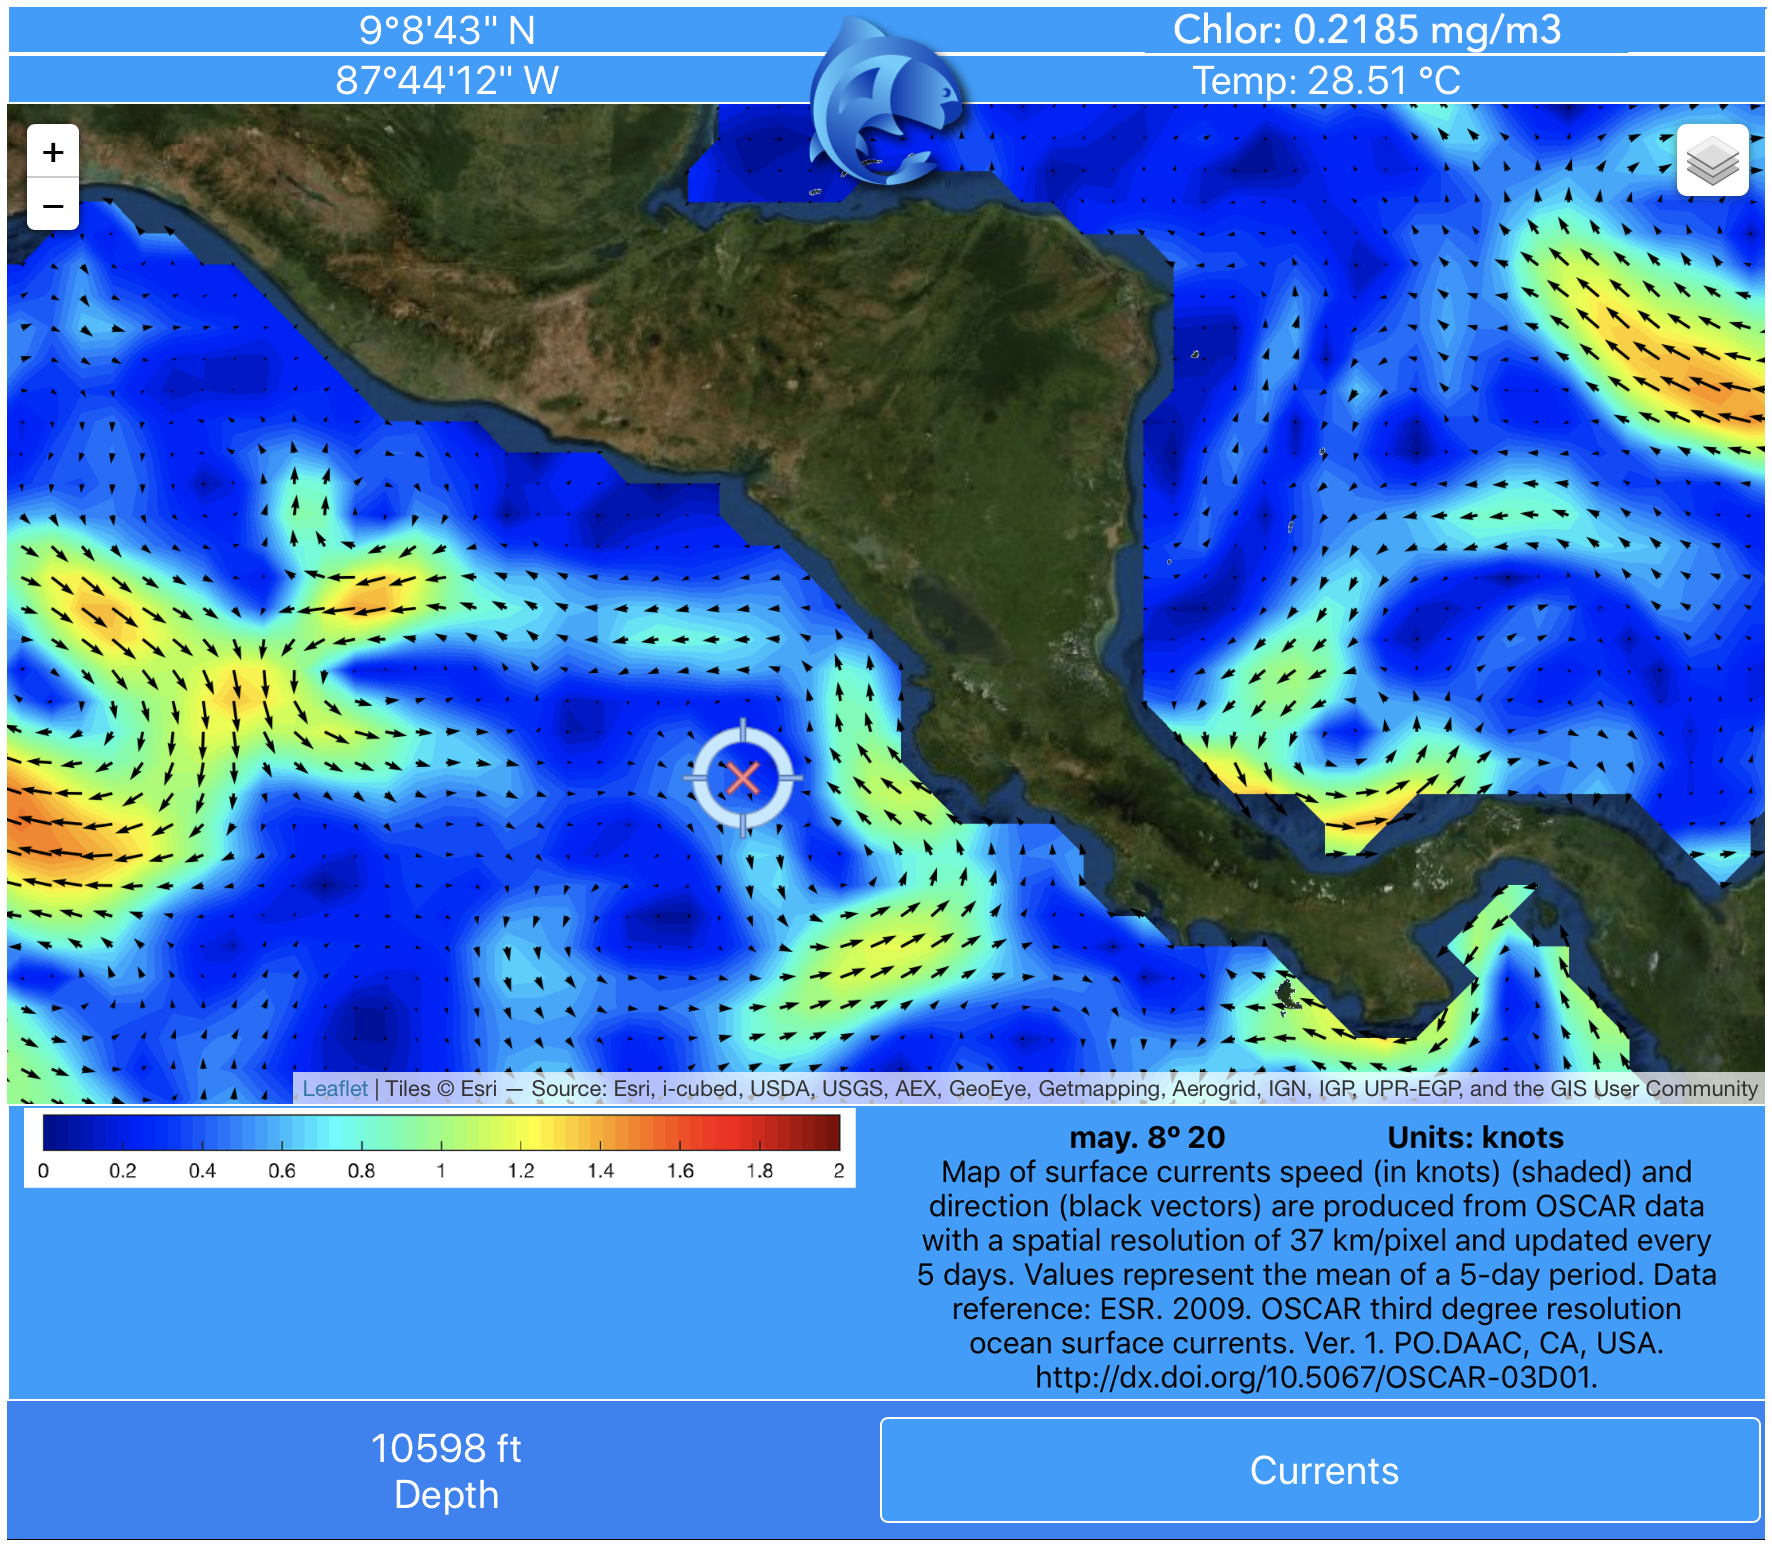 Information on currents around Central America from pezCA